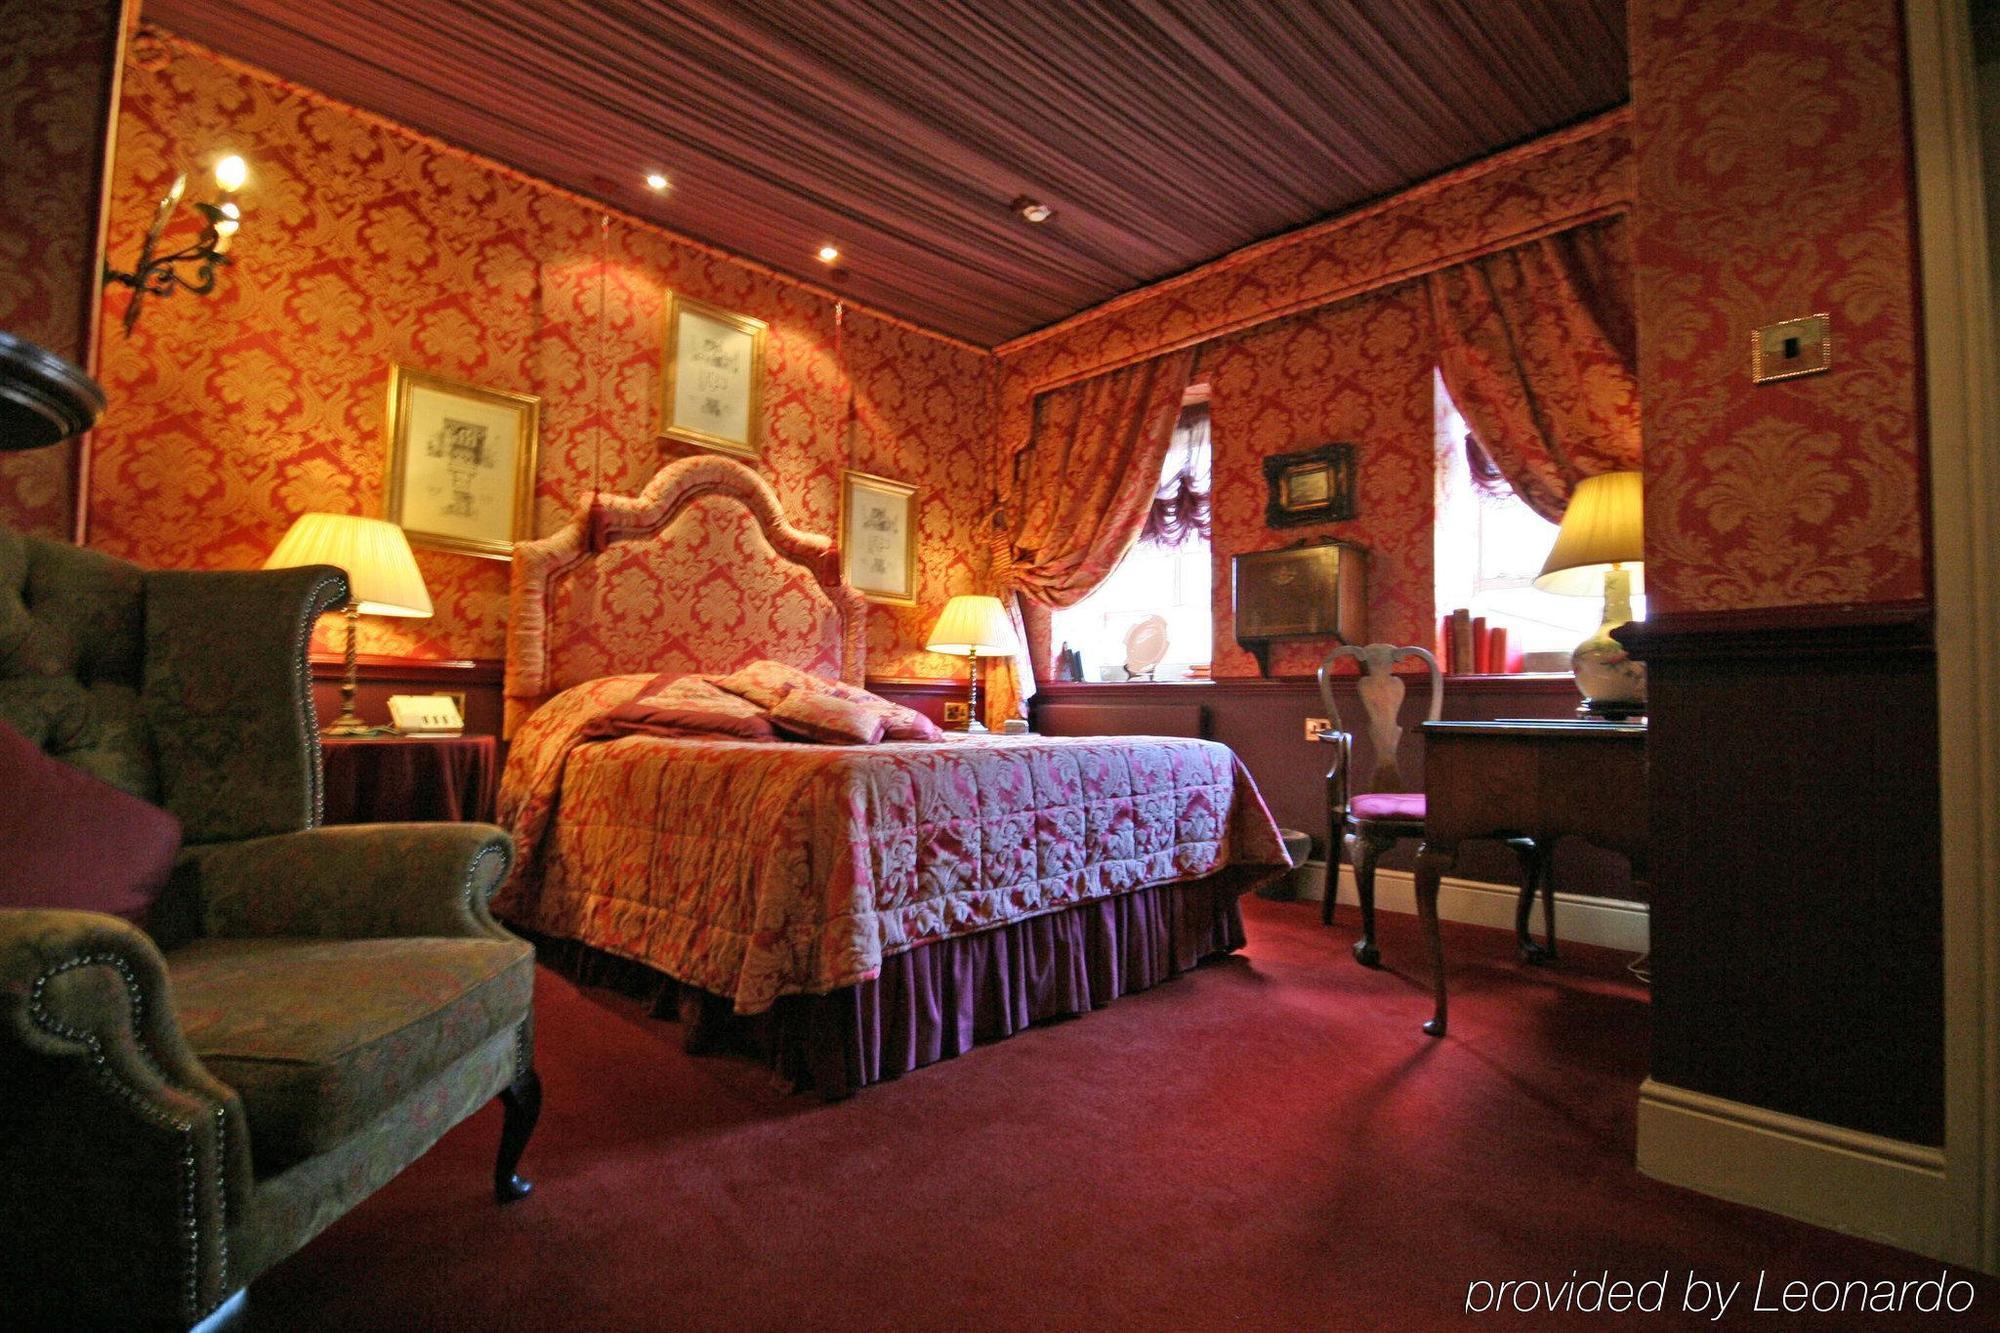 Lumley Castle Hotel Chester-le-Street Chambre photo